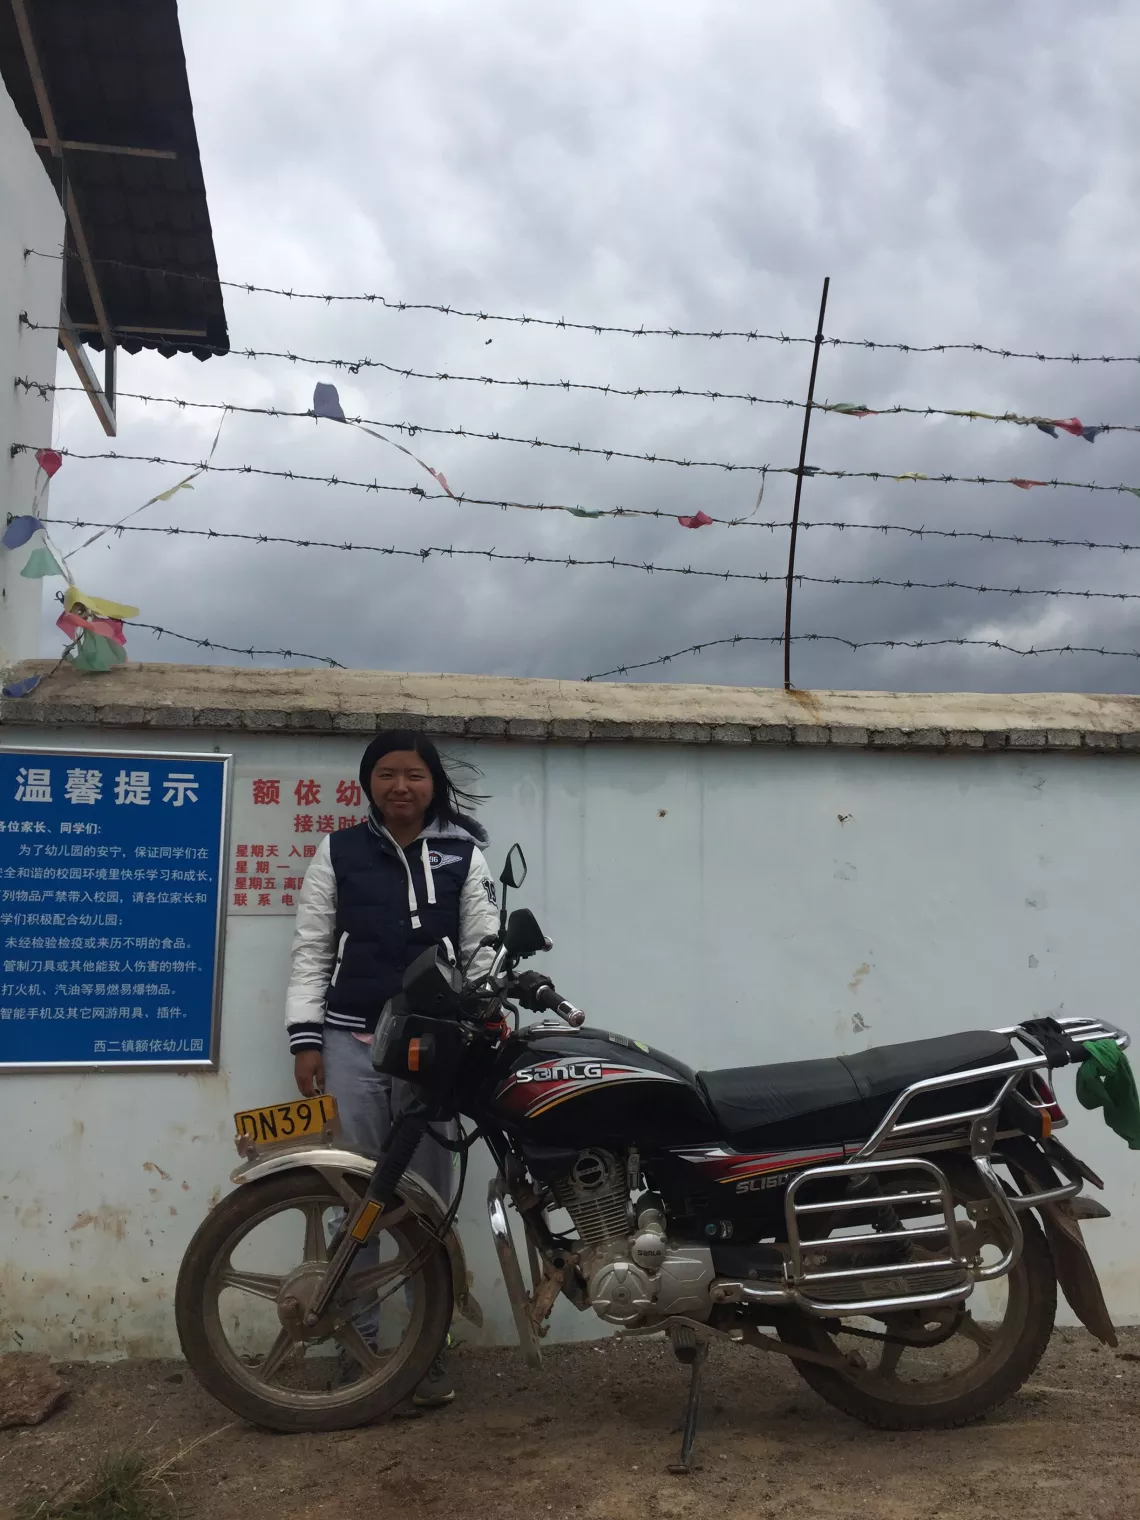 Fang Fang, principal of Eyi Kindergarten in Yunnan Province, stands behind her motorcycle outside the kindergarten.